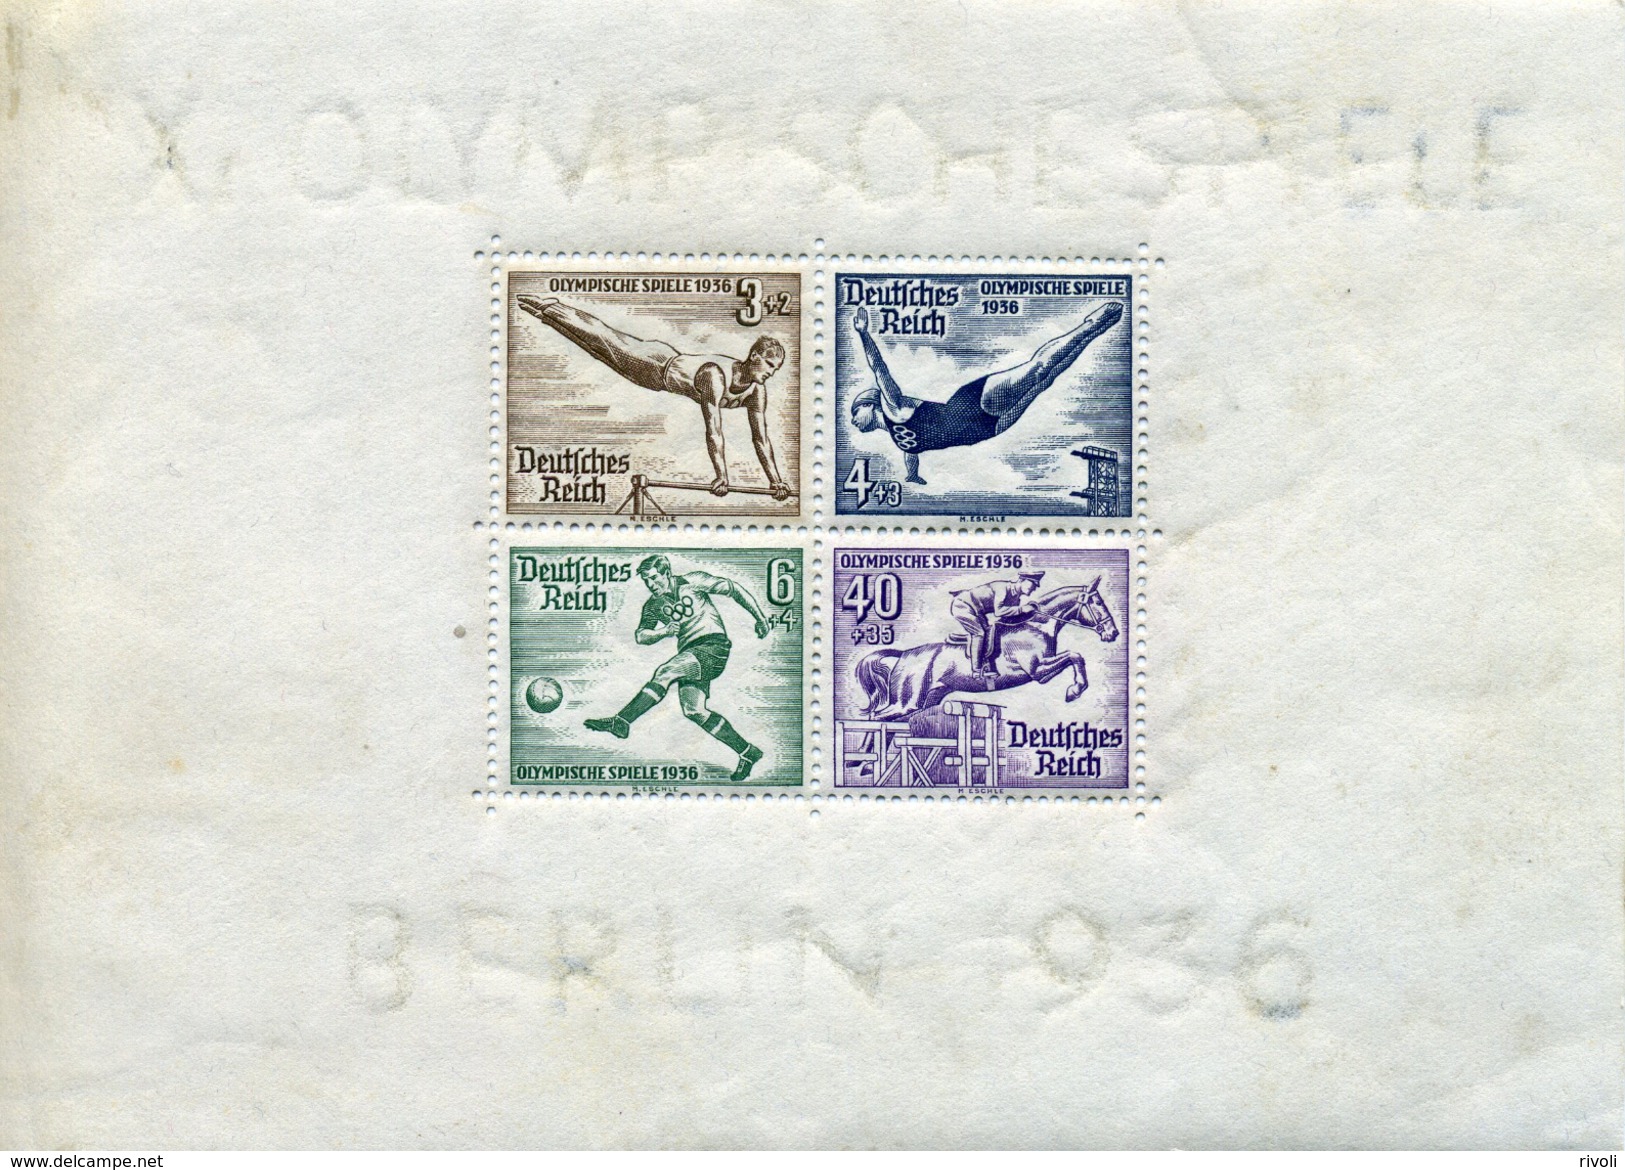 ALLEMAGNE EMPIRE III REICH Bloc Feuillet N°4 Jeux Olympiques 1936 NEUF - Blocs